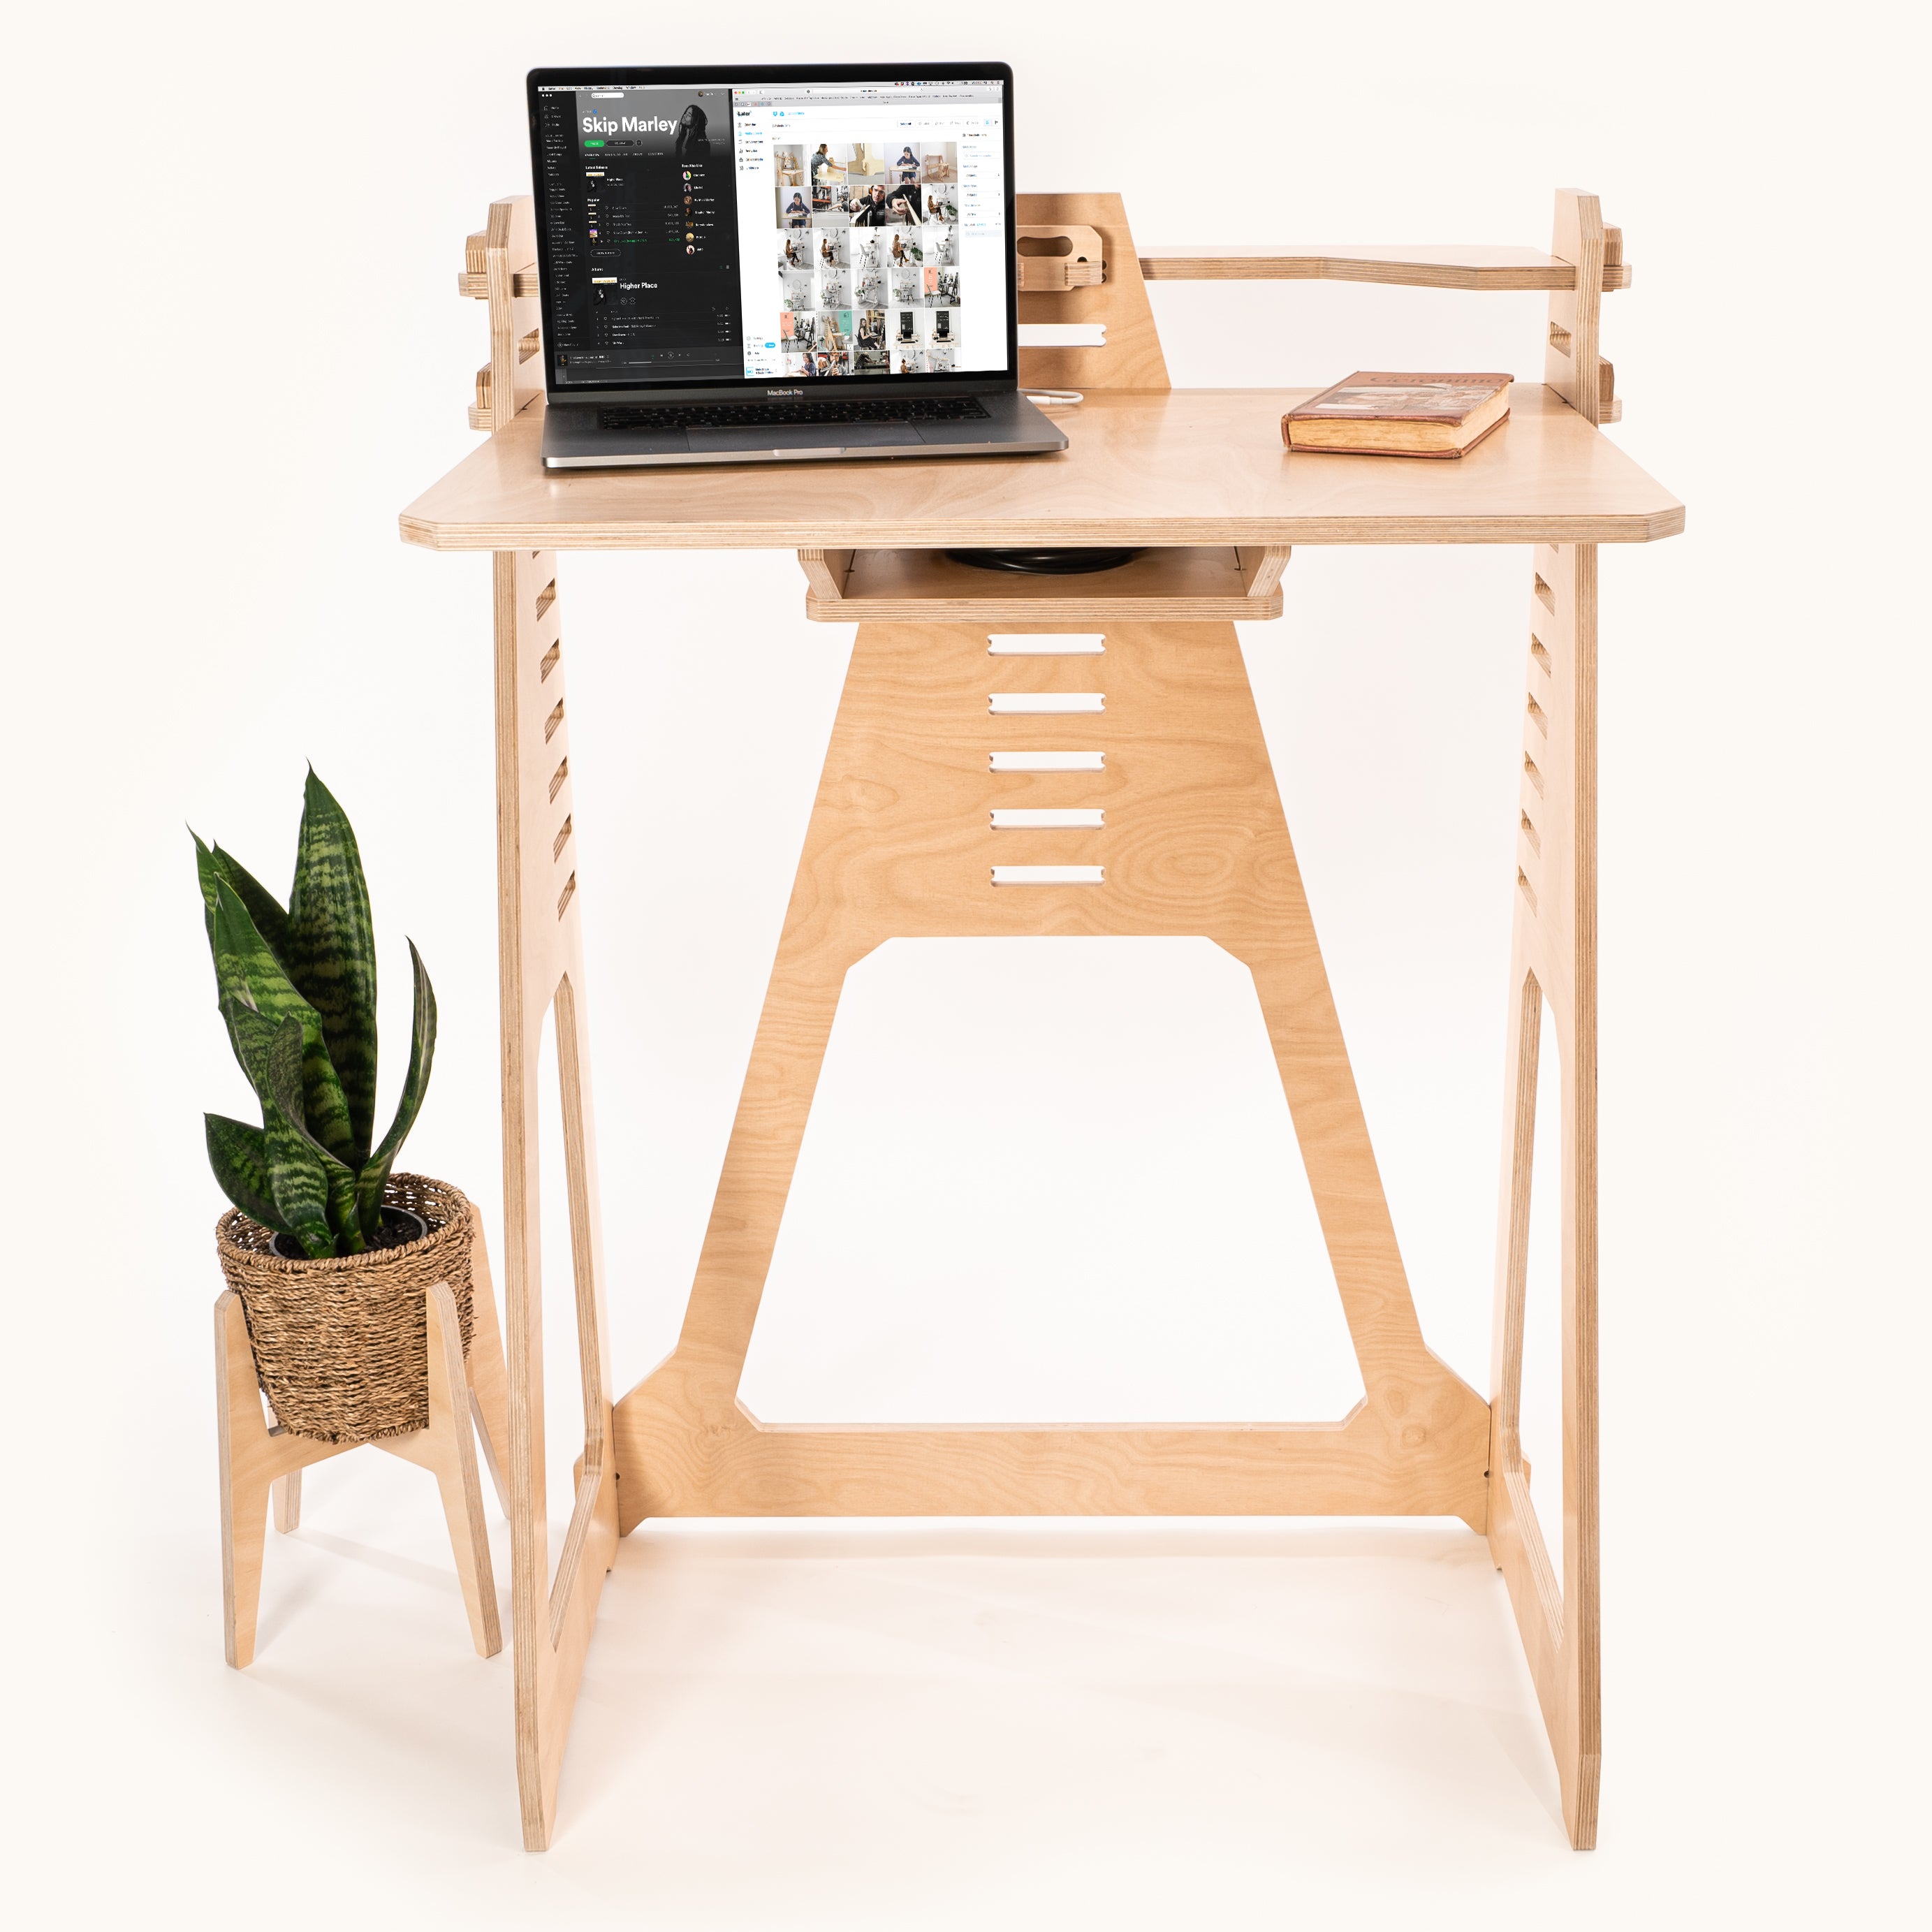 Work From Home Desk   Home Office Desk   NZ Made   Work From Home